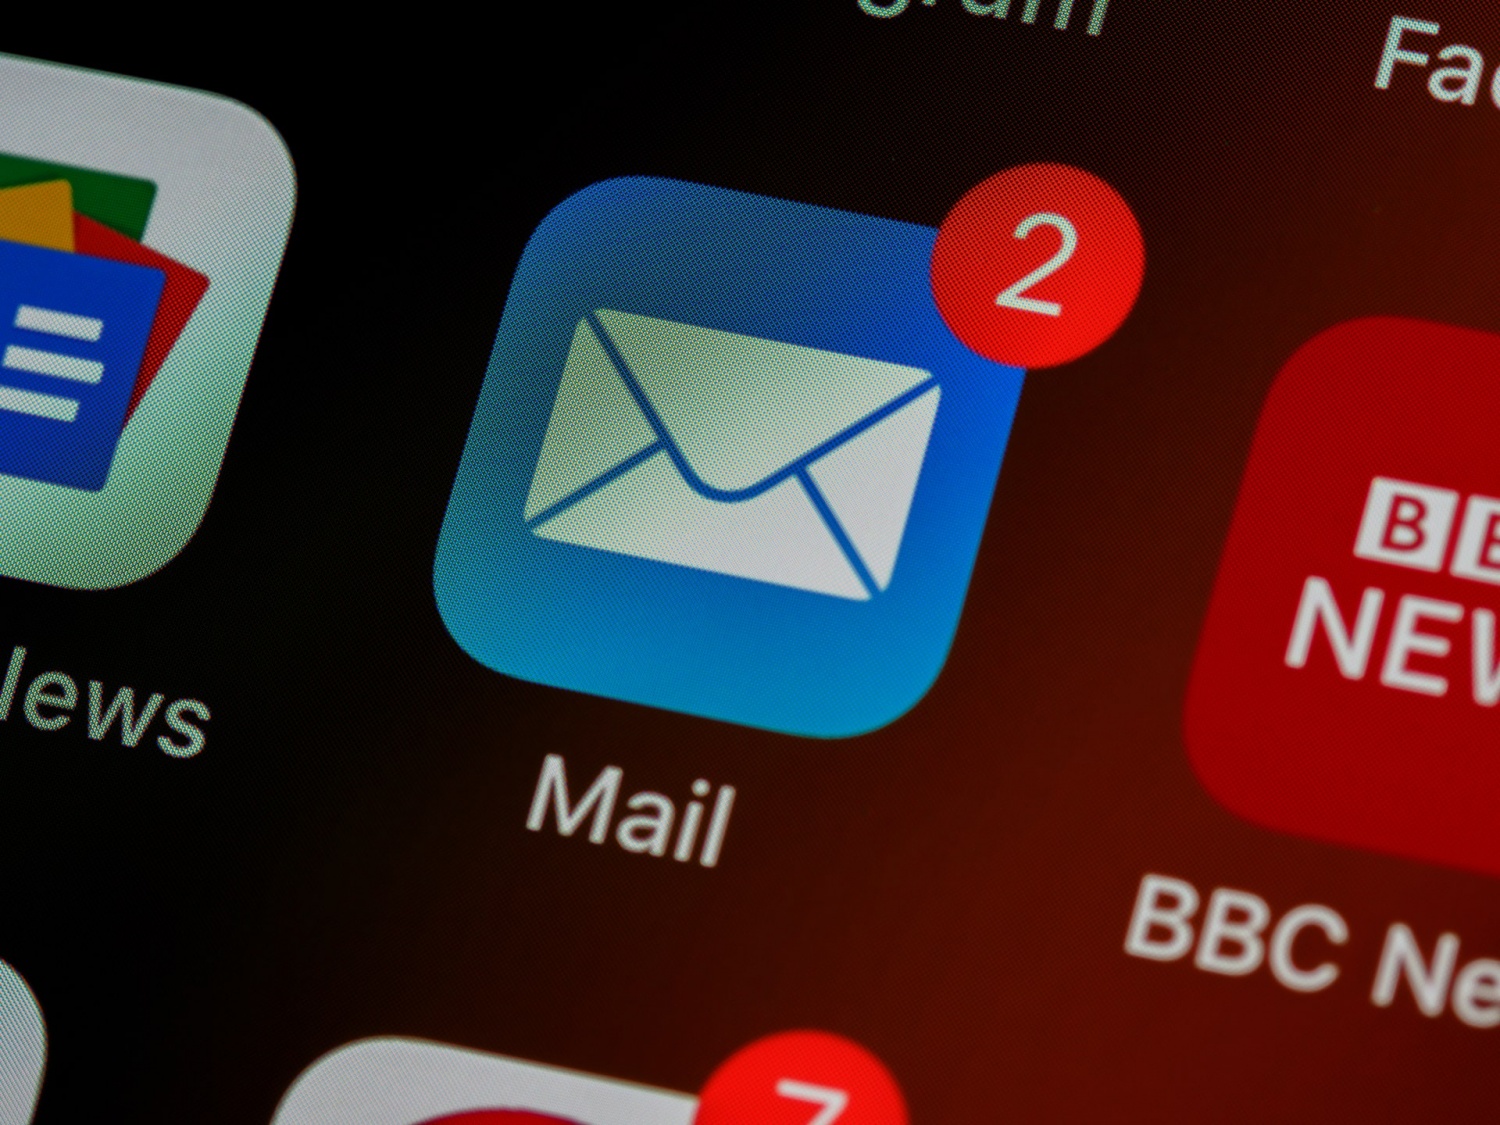 Tired of Spam Emails? How to Use 'Hide My Email' on iPhone and Kick Out Junk Mails